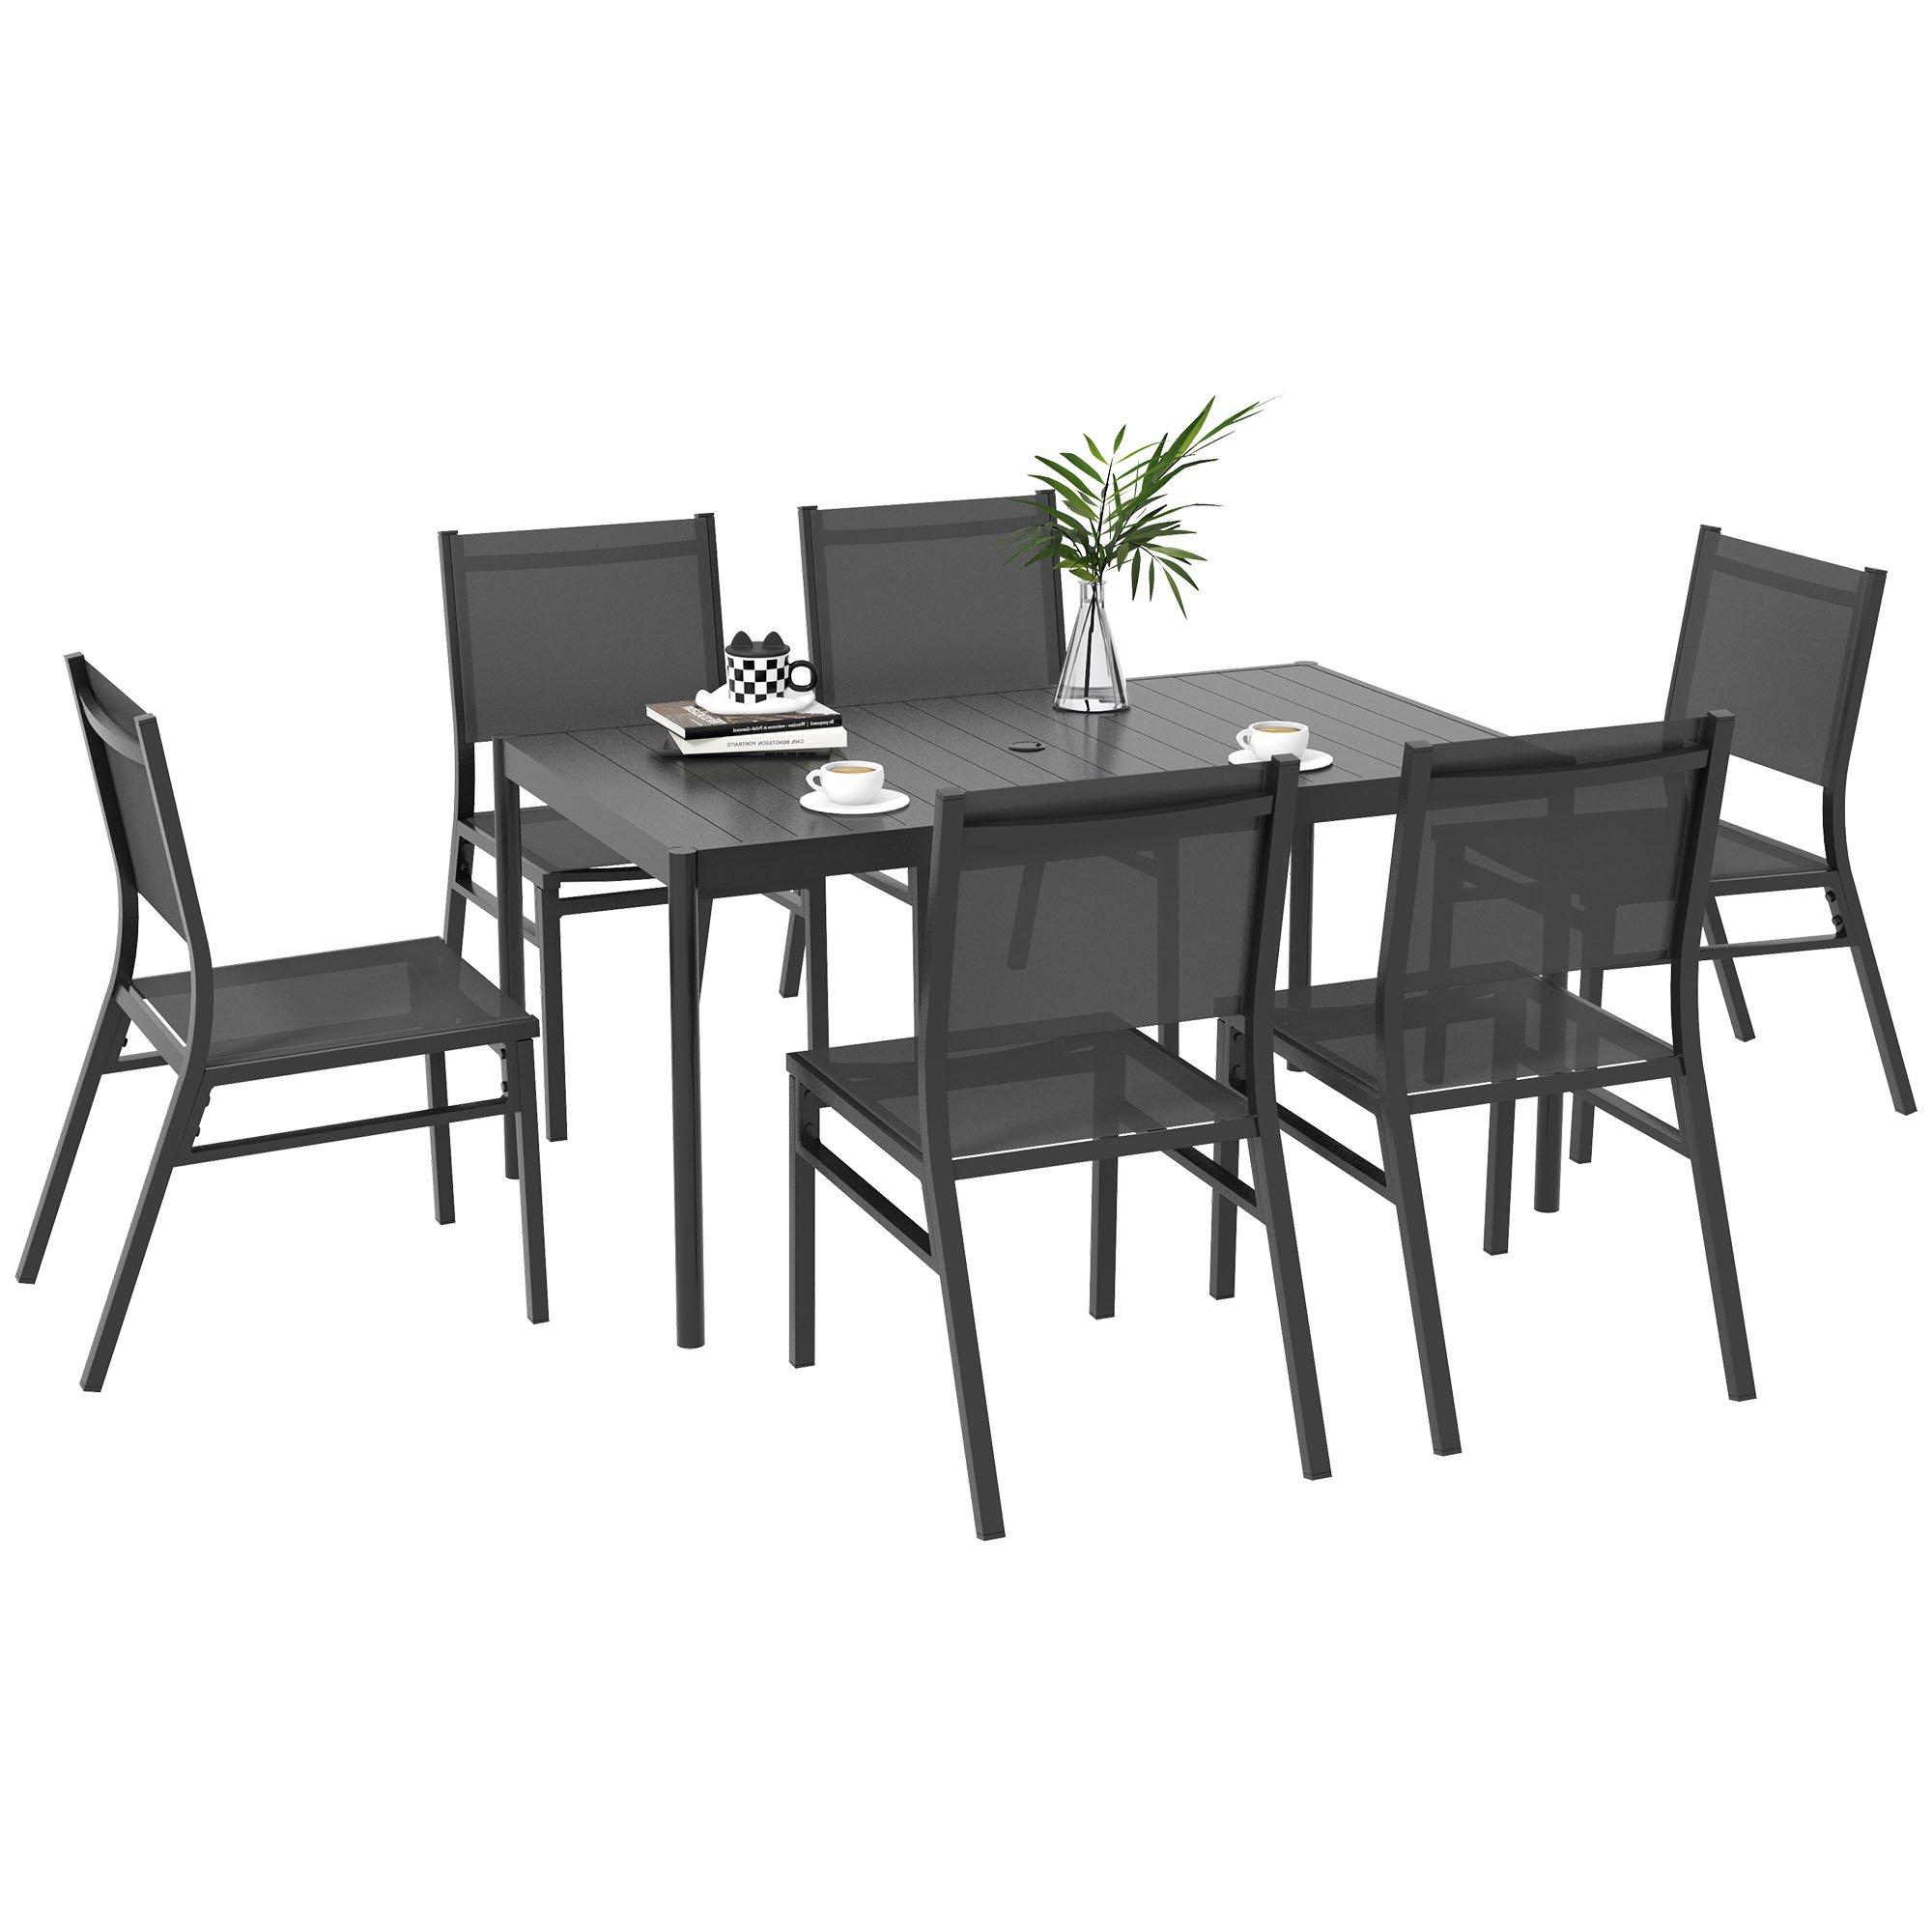 7 Piece Garden Dining Set with Breathable Mesh Seat, Aluminium Top